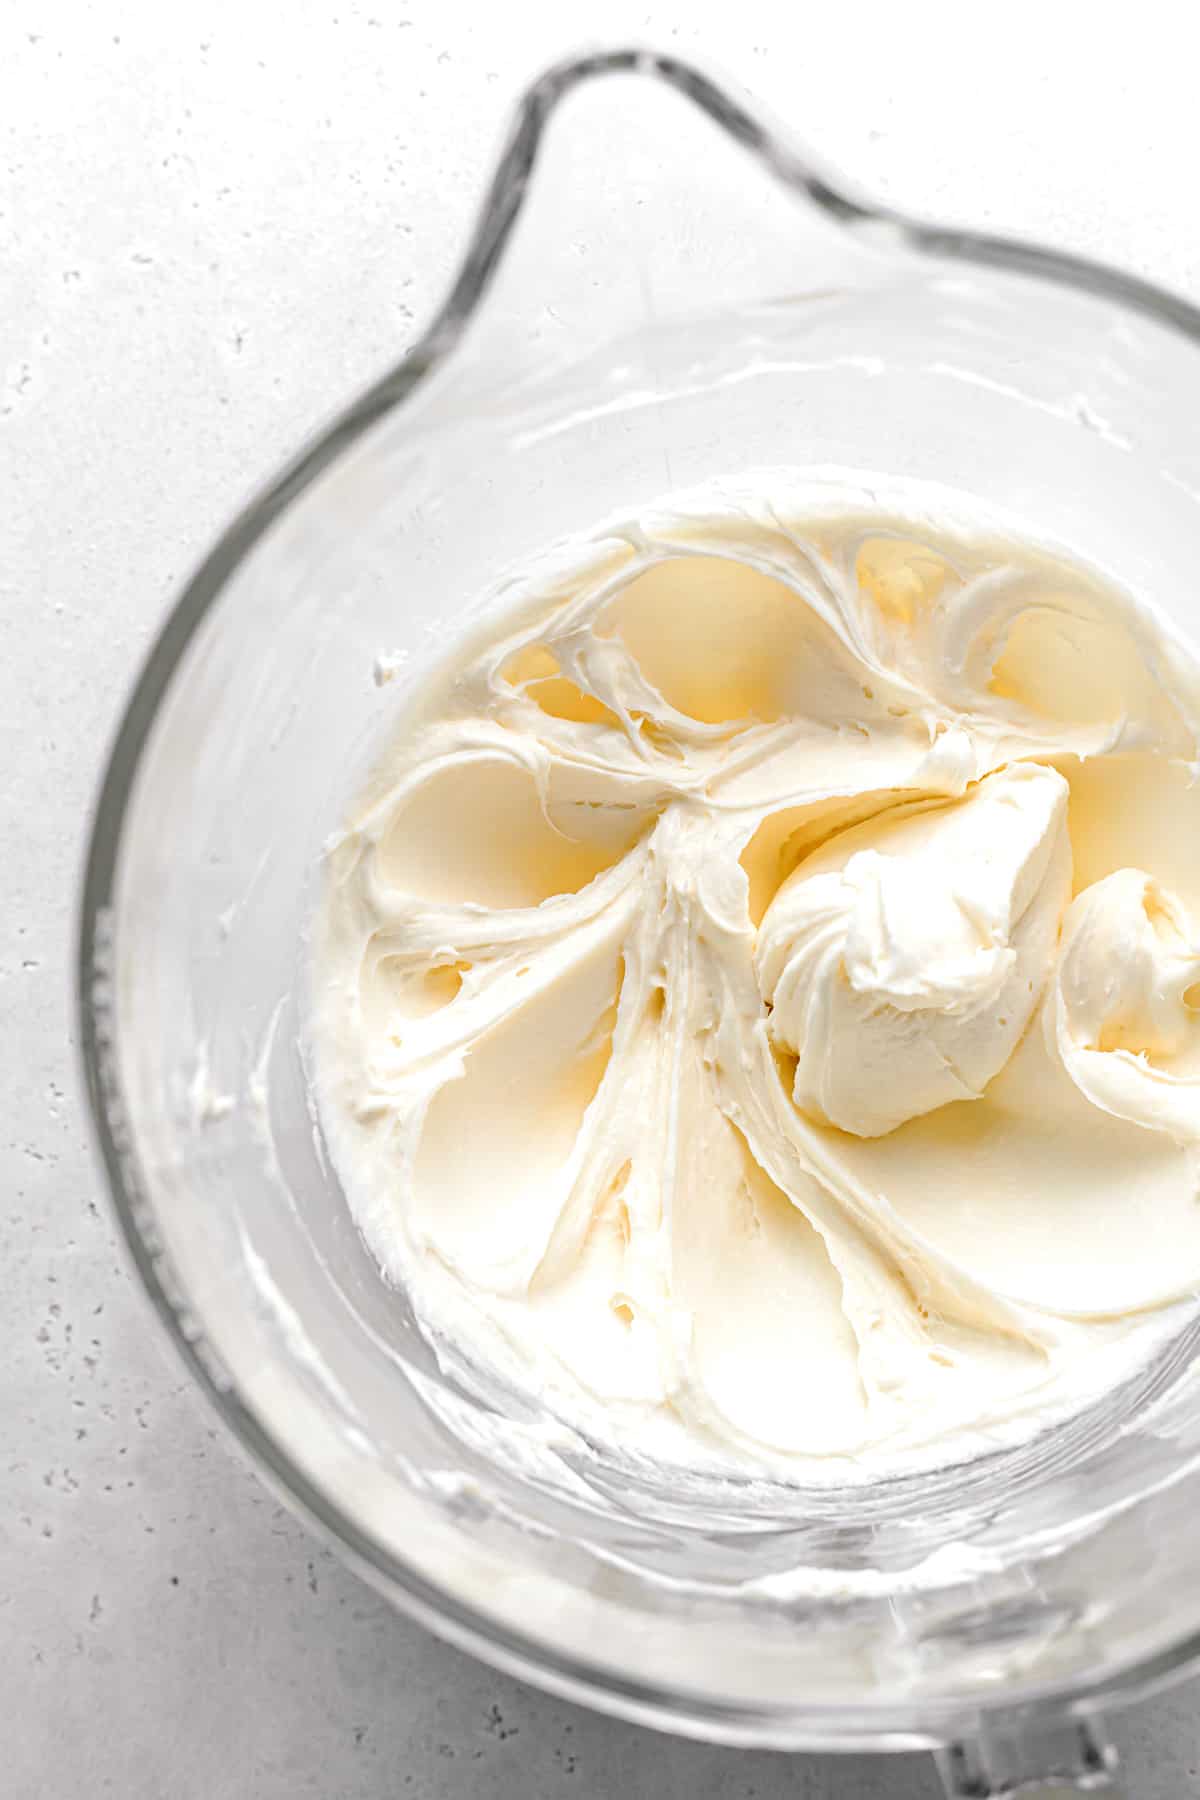 butter, cream cheese, and sugar creamed together in glass bowl.